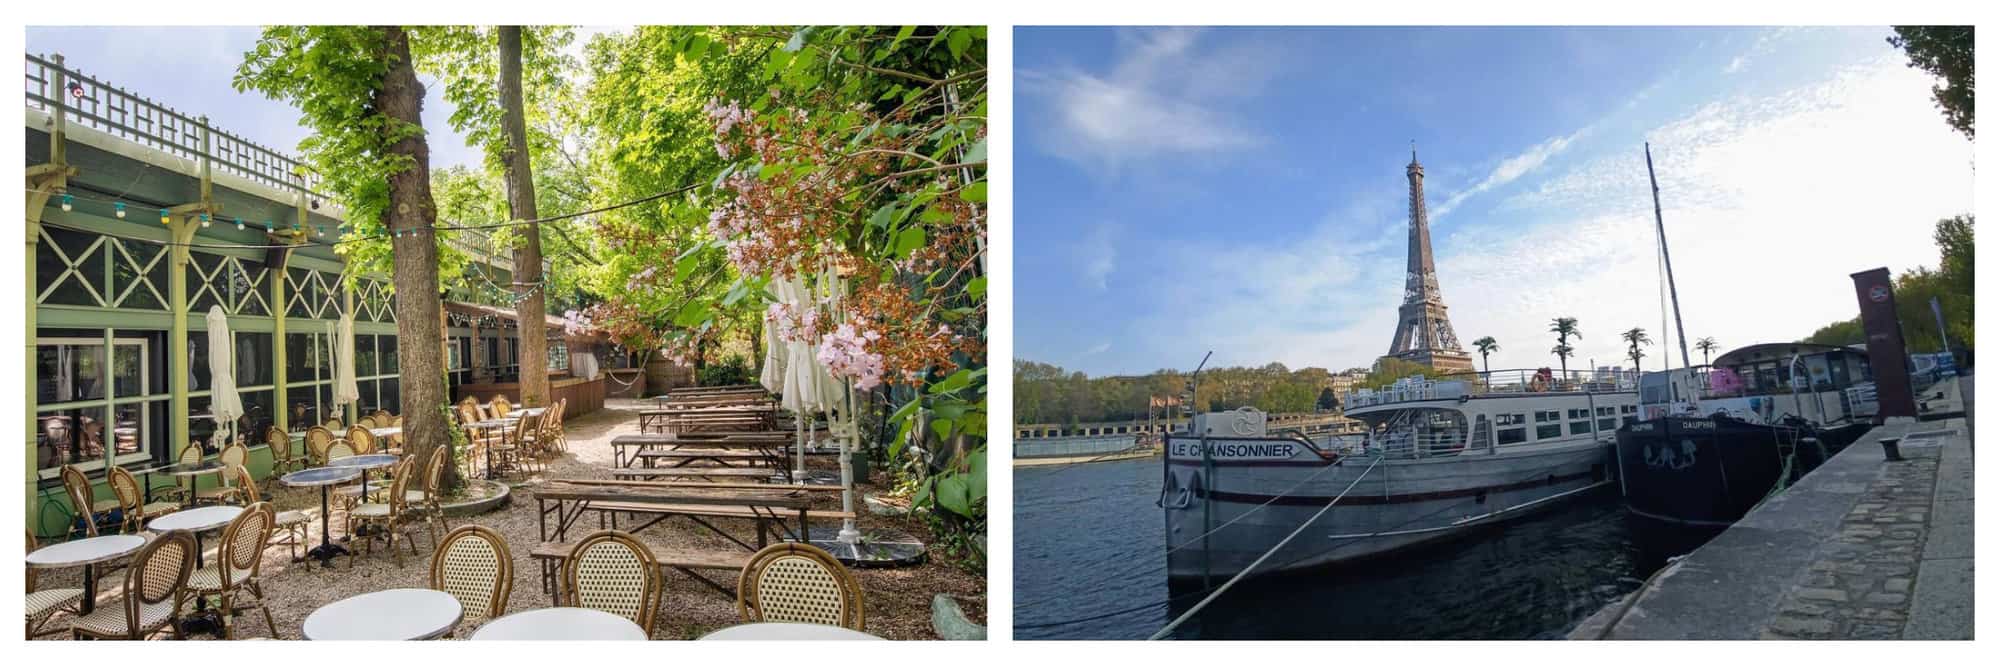 Left: a picture of an outdoor bar in Paris that rests in a Garden full of green trees. There is several tables and benches in the photo however no people. Right: a picture of a boat along the Seine in Paris with the Eiffel Tower in the background on a sunny day.